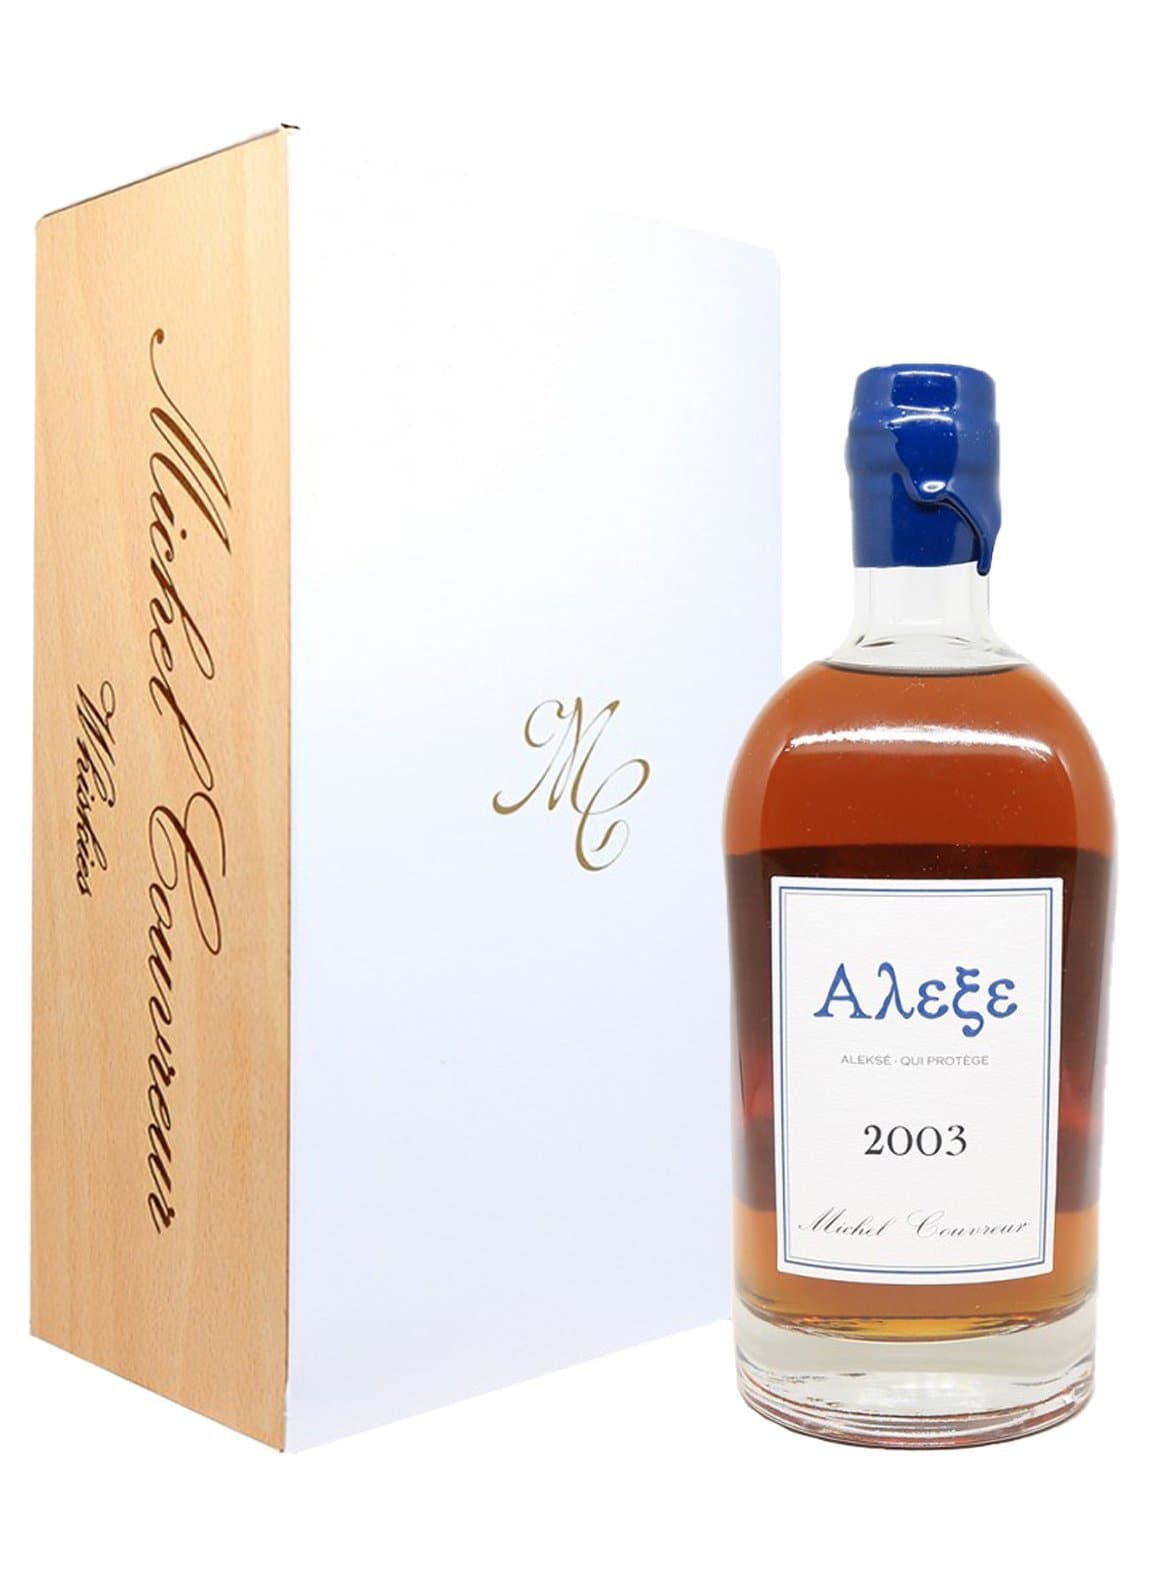 Michel Couvreur Whisky 2003 Alekse 45.38% 500ml | Whiskey | Shop online at Spirits of France